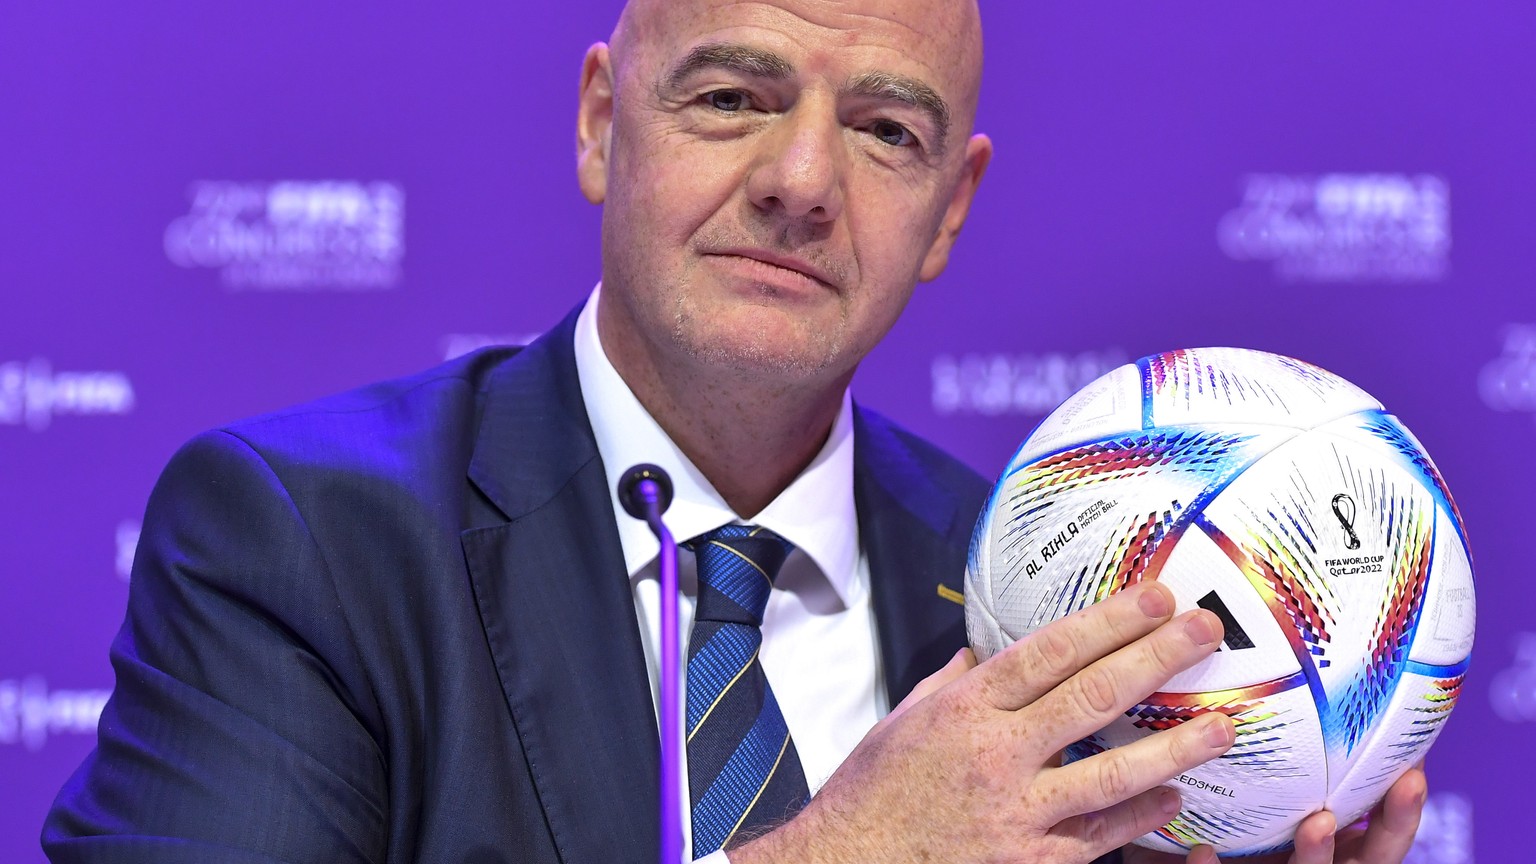 epa09861814 FIFA president Gianni Infantino poses with the official World Cup 2022 matchball Al Rihla before the closing press conference of the 72nd FIFA Congress in Doha, Qatar, 31 March 2022. EPA/N ...